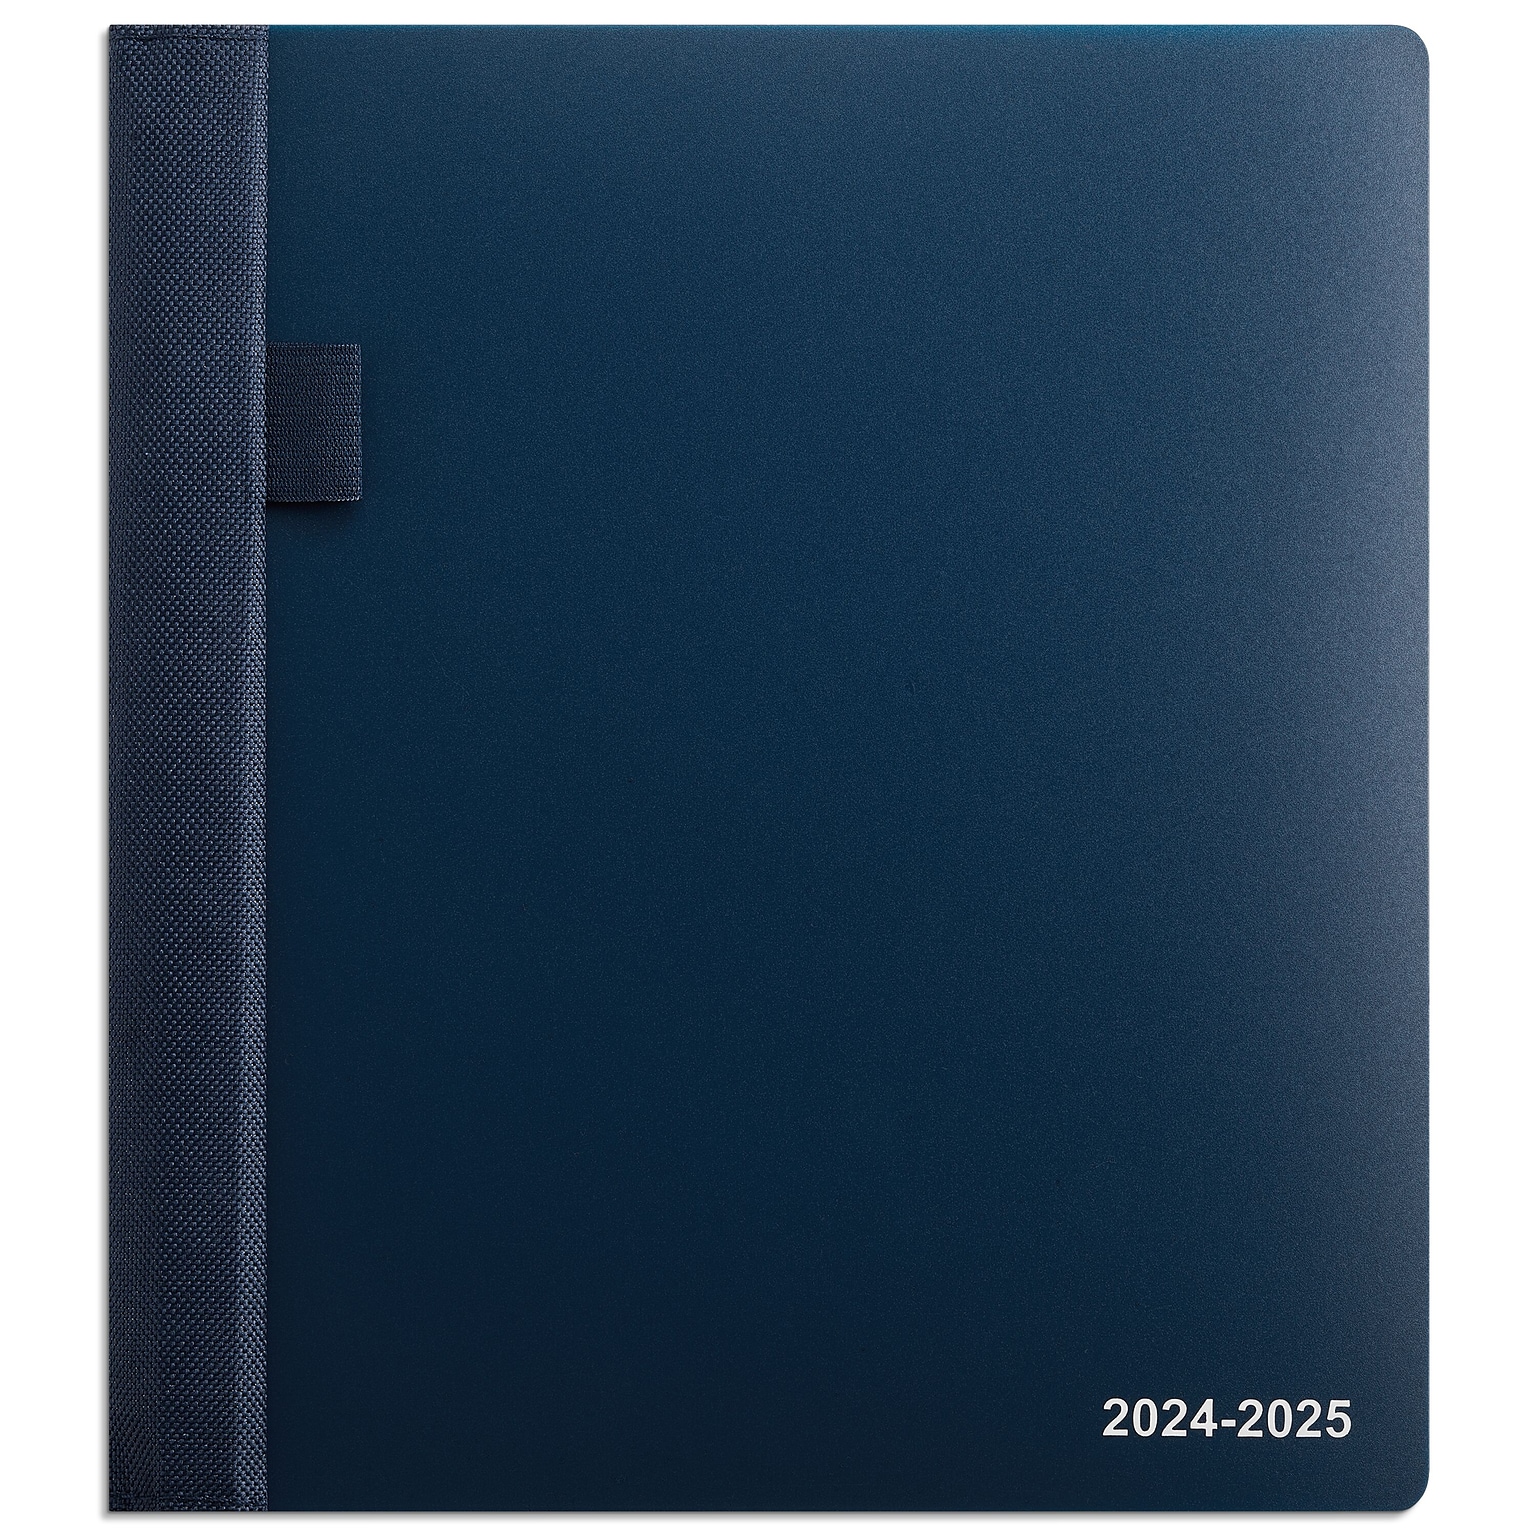 2024-2025 Staples 7 x 9 Academic Weekly & Monthly Appointment Book, Plastic Cover, Navy (ST60360-23)